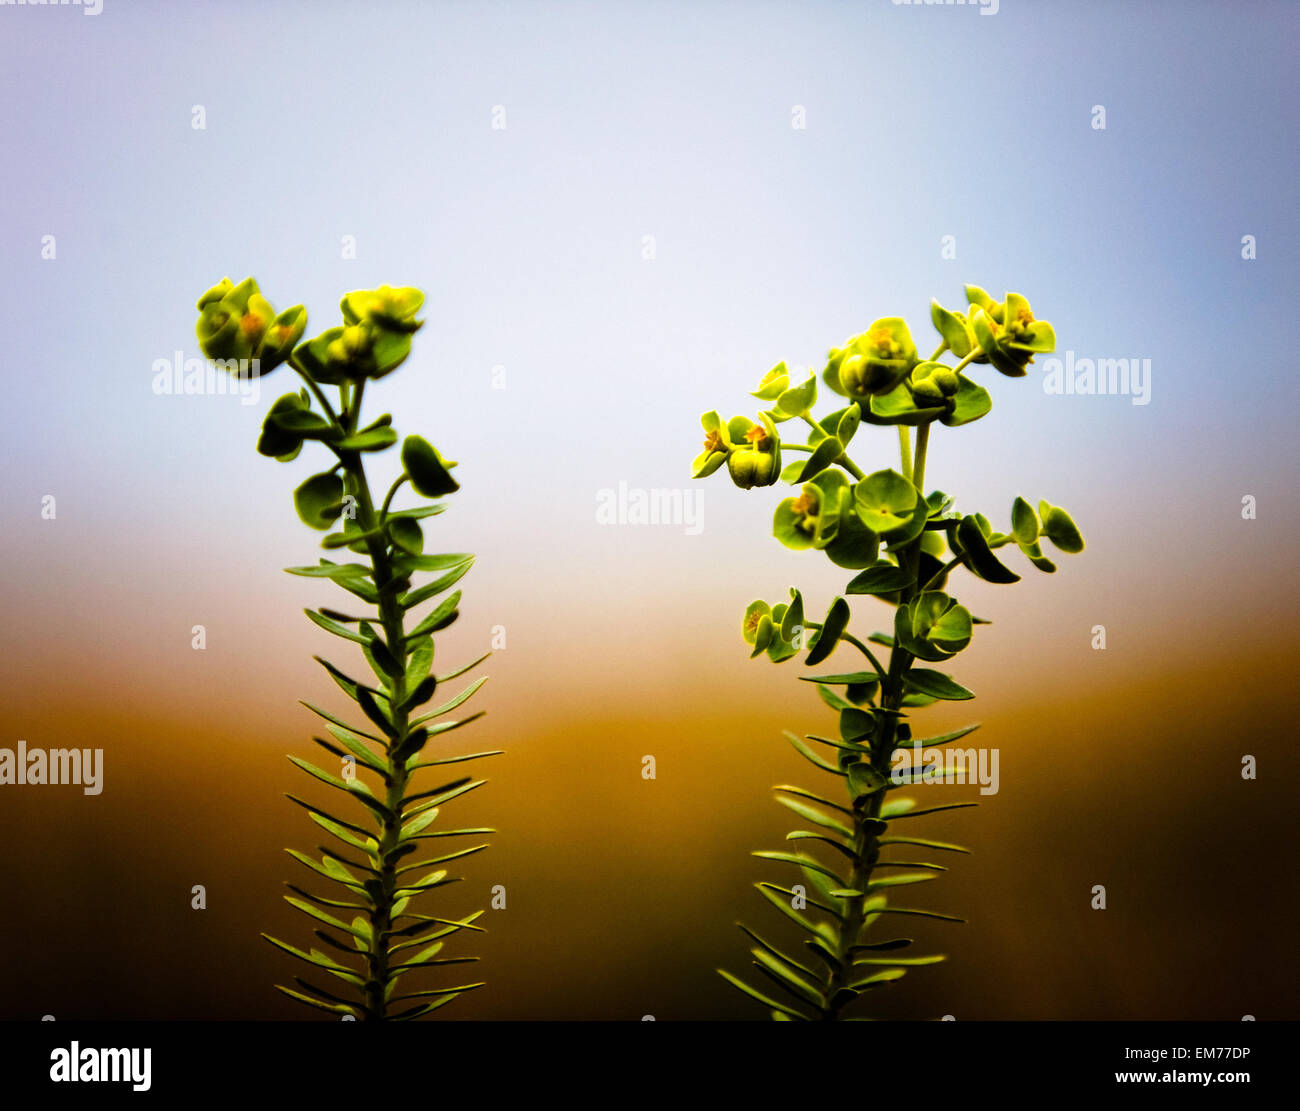 Strange yellow and green plants rising up against a blurry colorful gradient of earth and sky in a very shallow depth of field Stock Photo